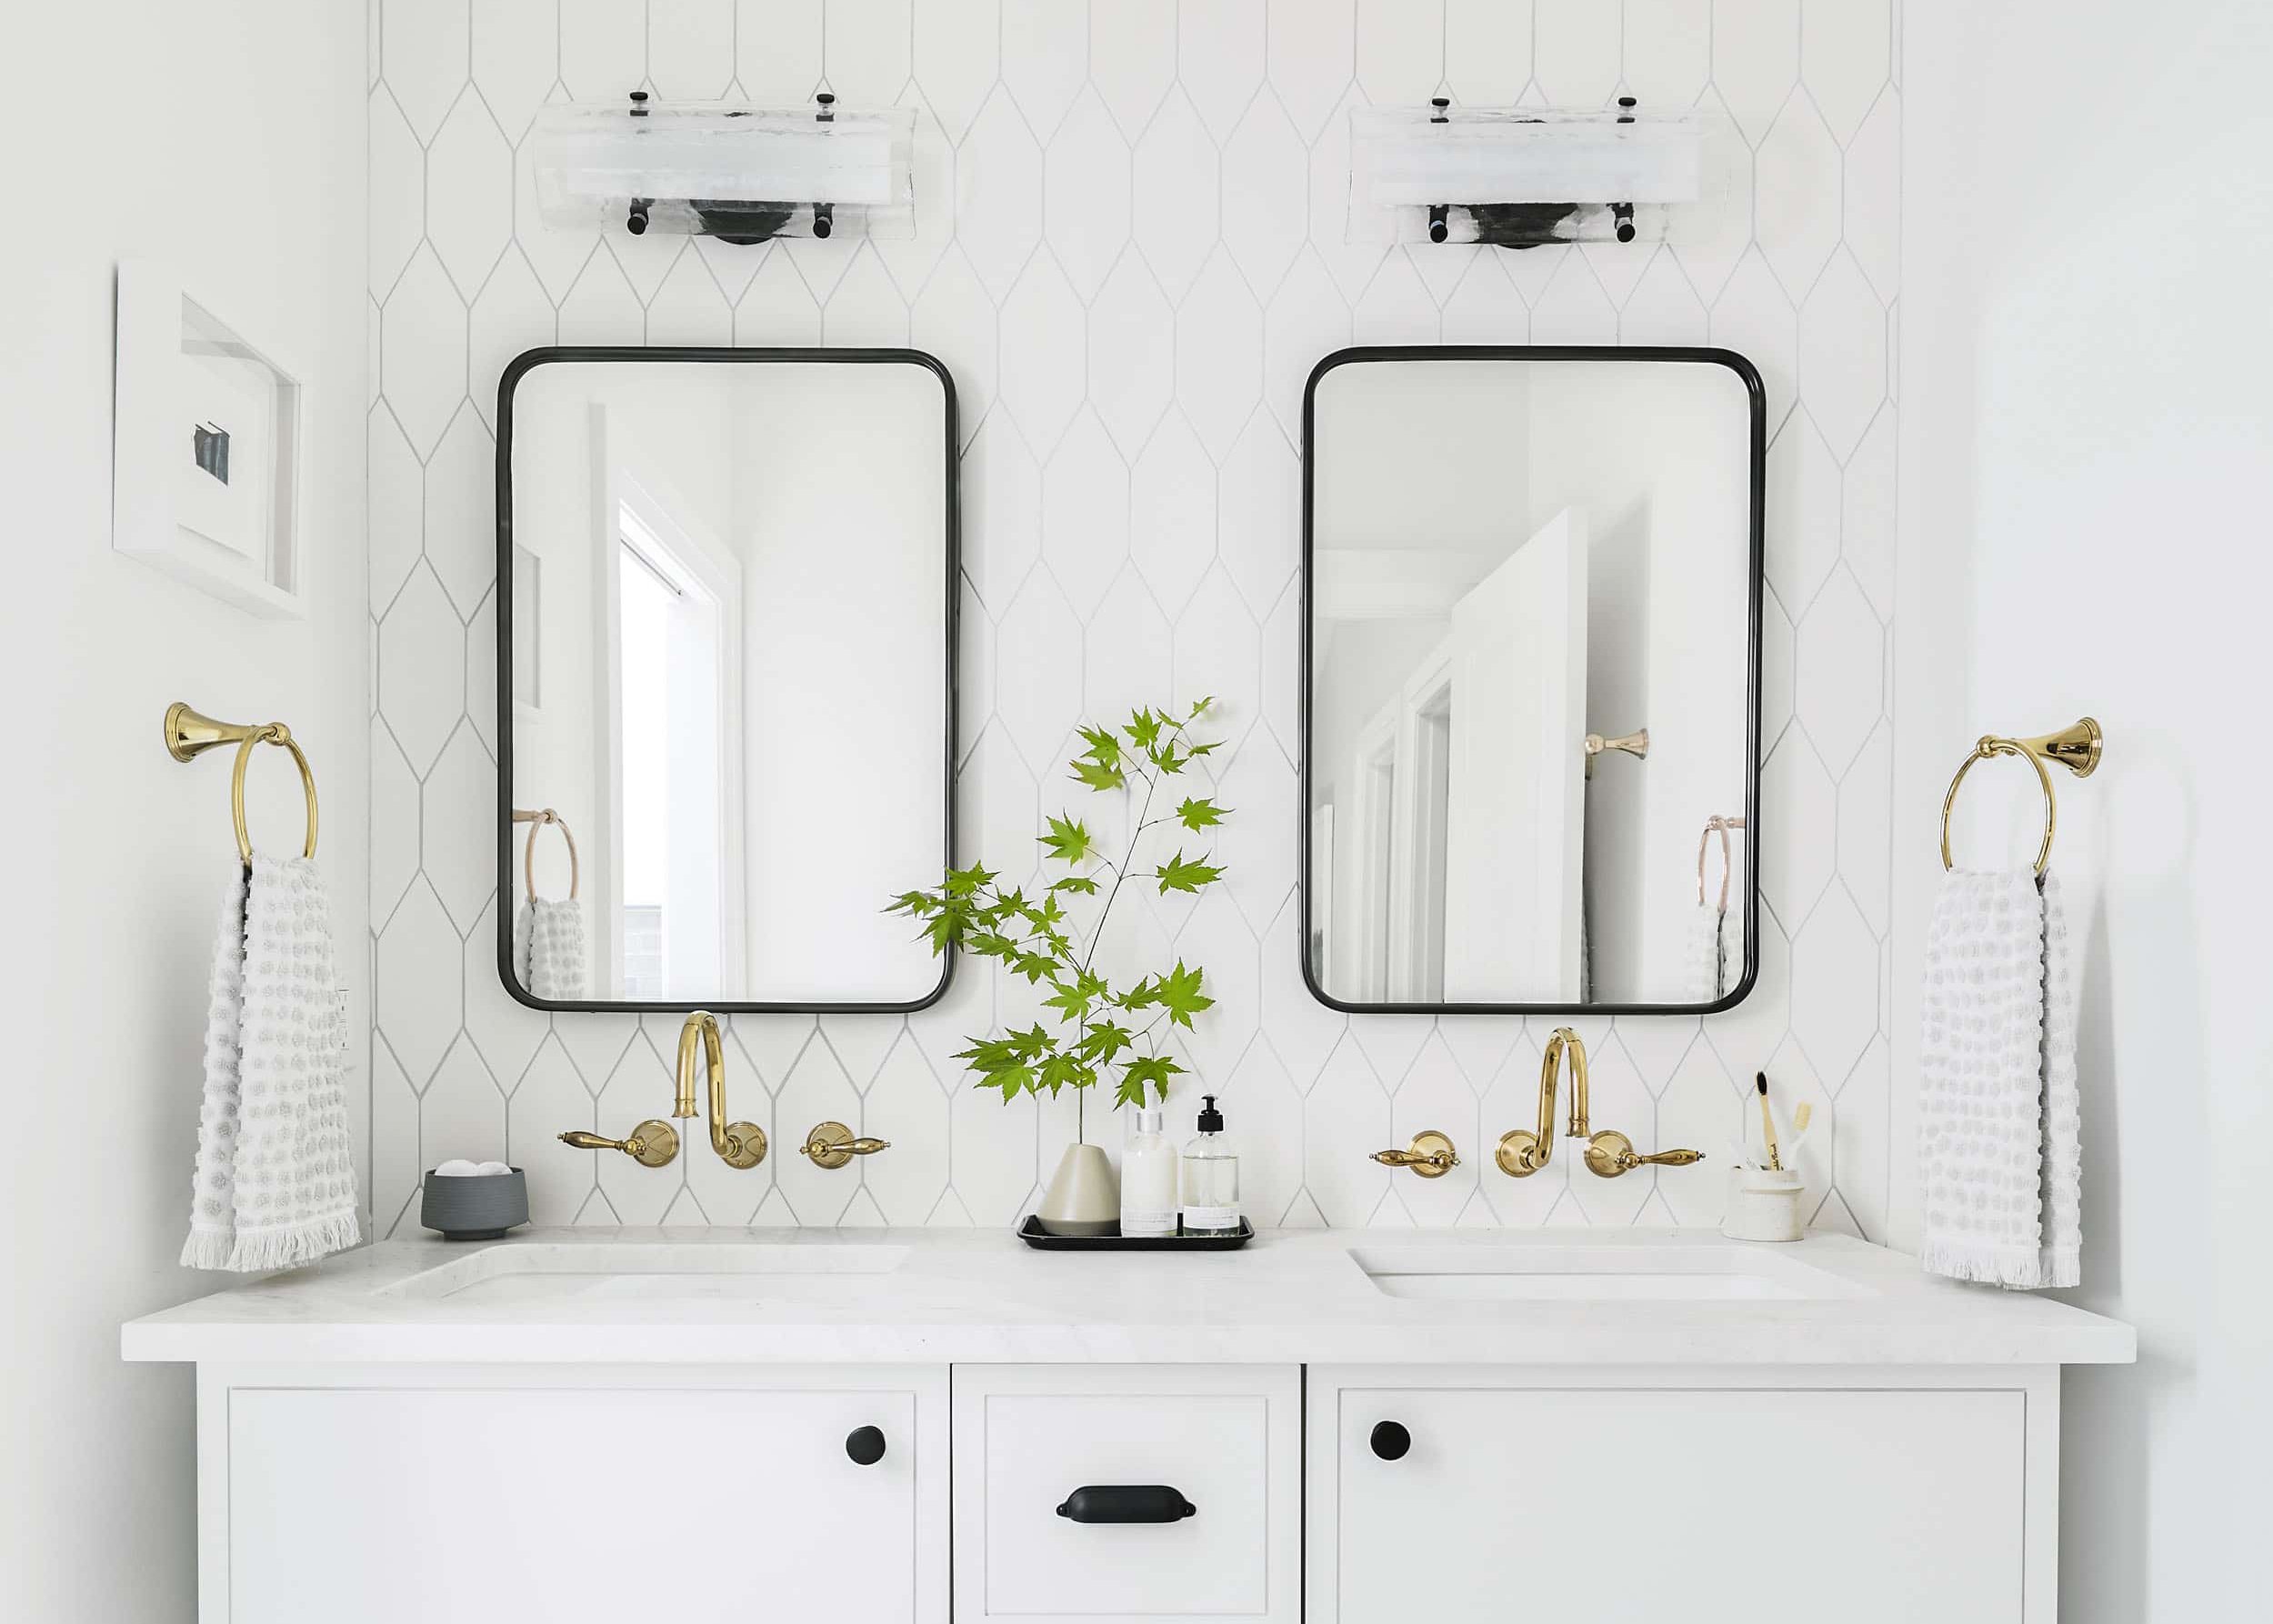 Got An Unorganized Bathroom Situation? Here Are the Best Storage Solutions (And Products)